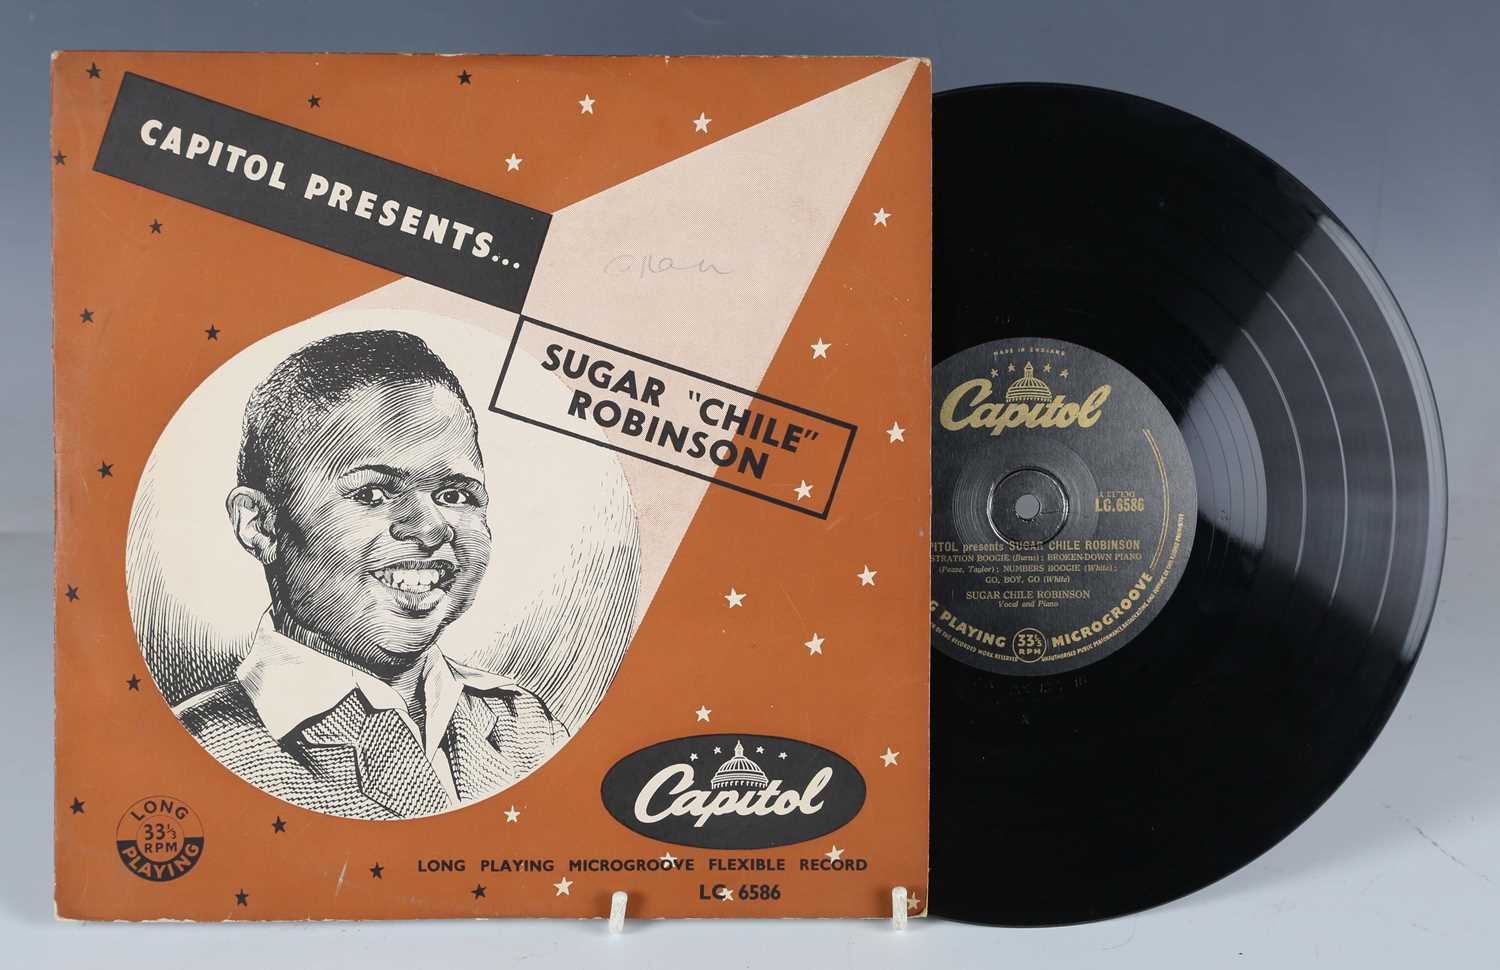 A collection of approximately fifty jazz and blues LP records, 10" and 12", including 'Capitol